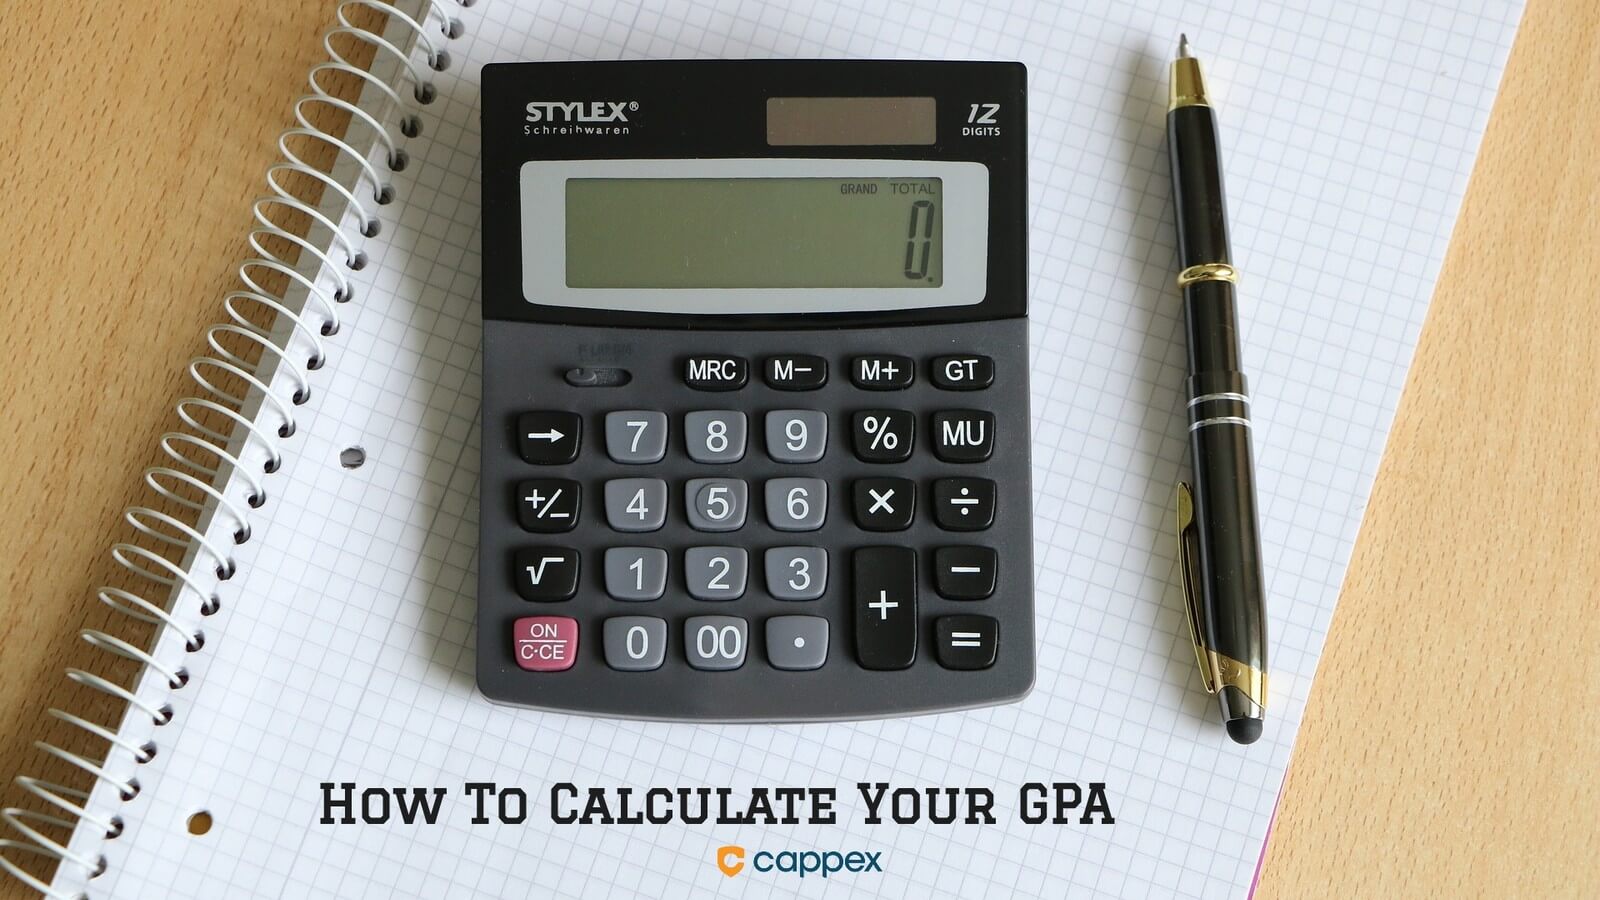 How to Calculate Your GPA